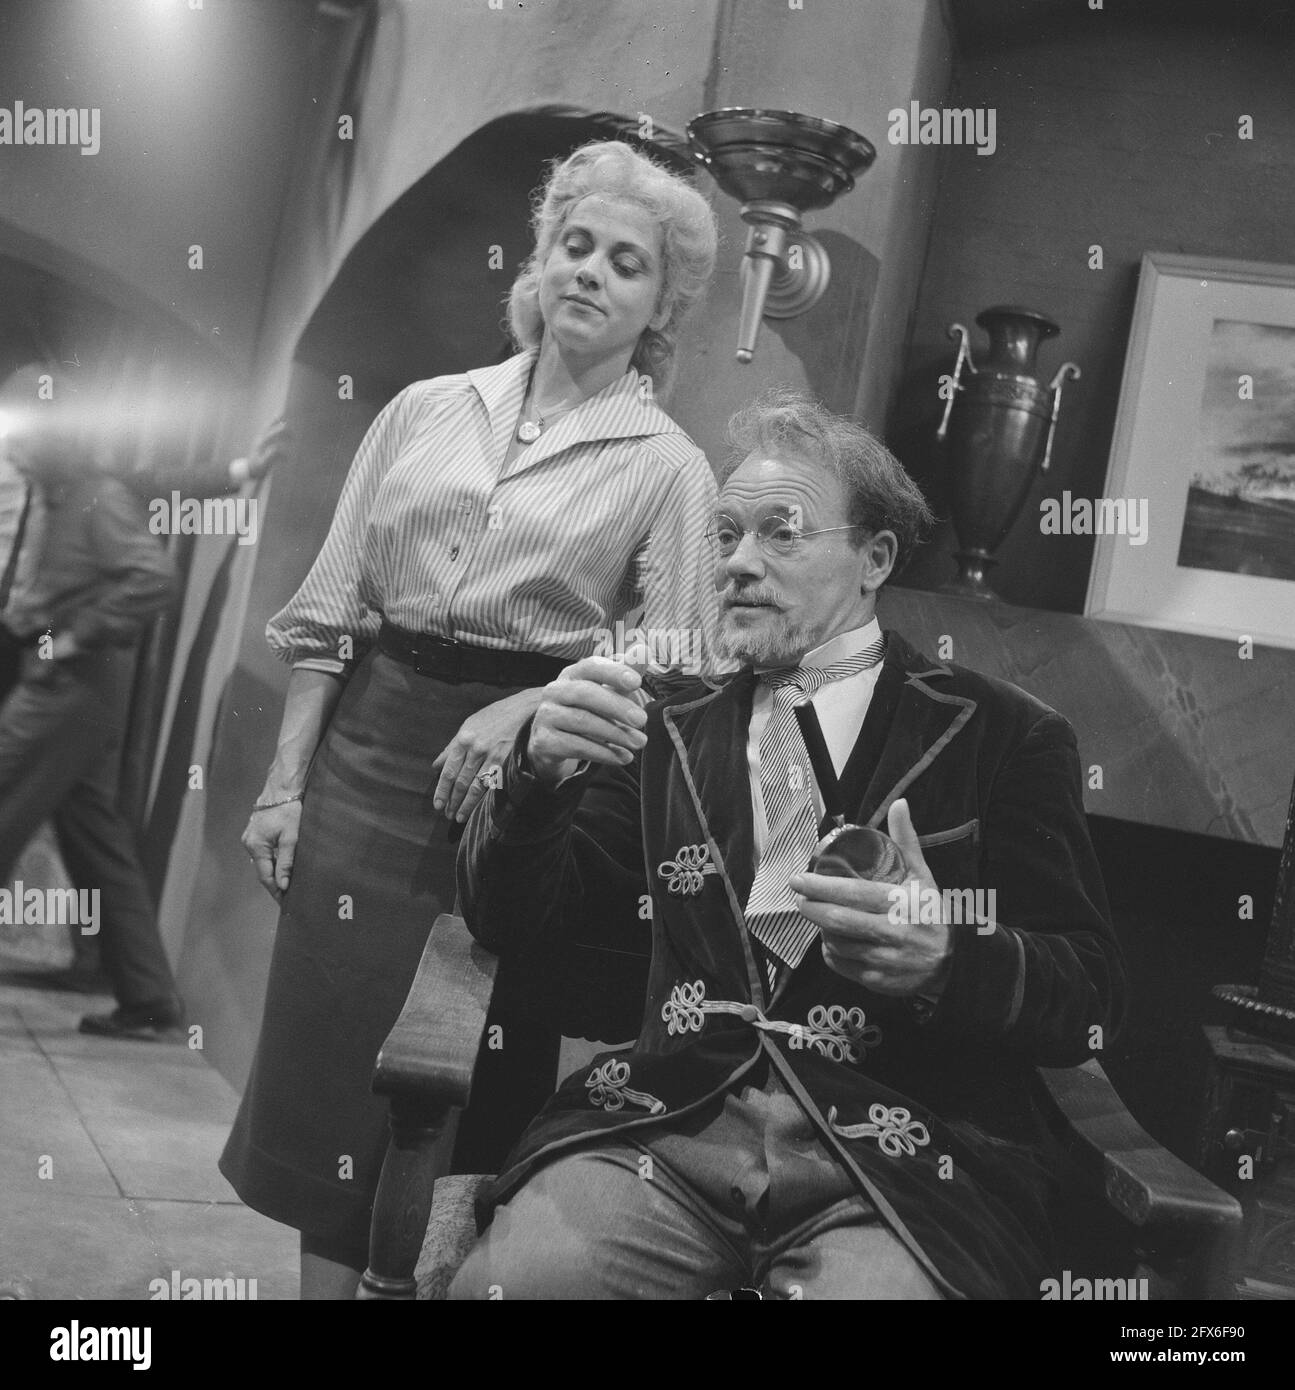 He's at the Crucible', a TV play by VPRO, Max Croiset as Professor Mensch and Emmy Lopes Dias as Miss Schmidt, October 17, 1962, actors, television dramas, The Netherlands, 20th century press agency photo, news to remember, documentary, historic photography 1945-1990, visual stories, human history of the Twentieth Century, capturing moments in time Stock Photo